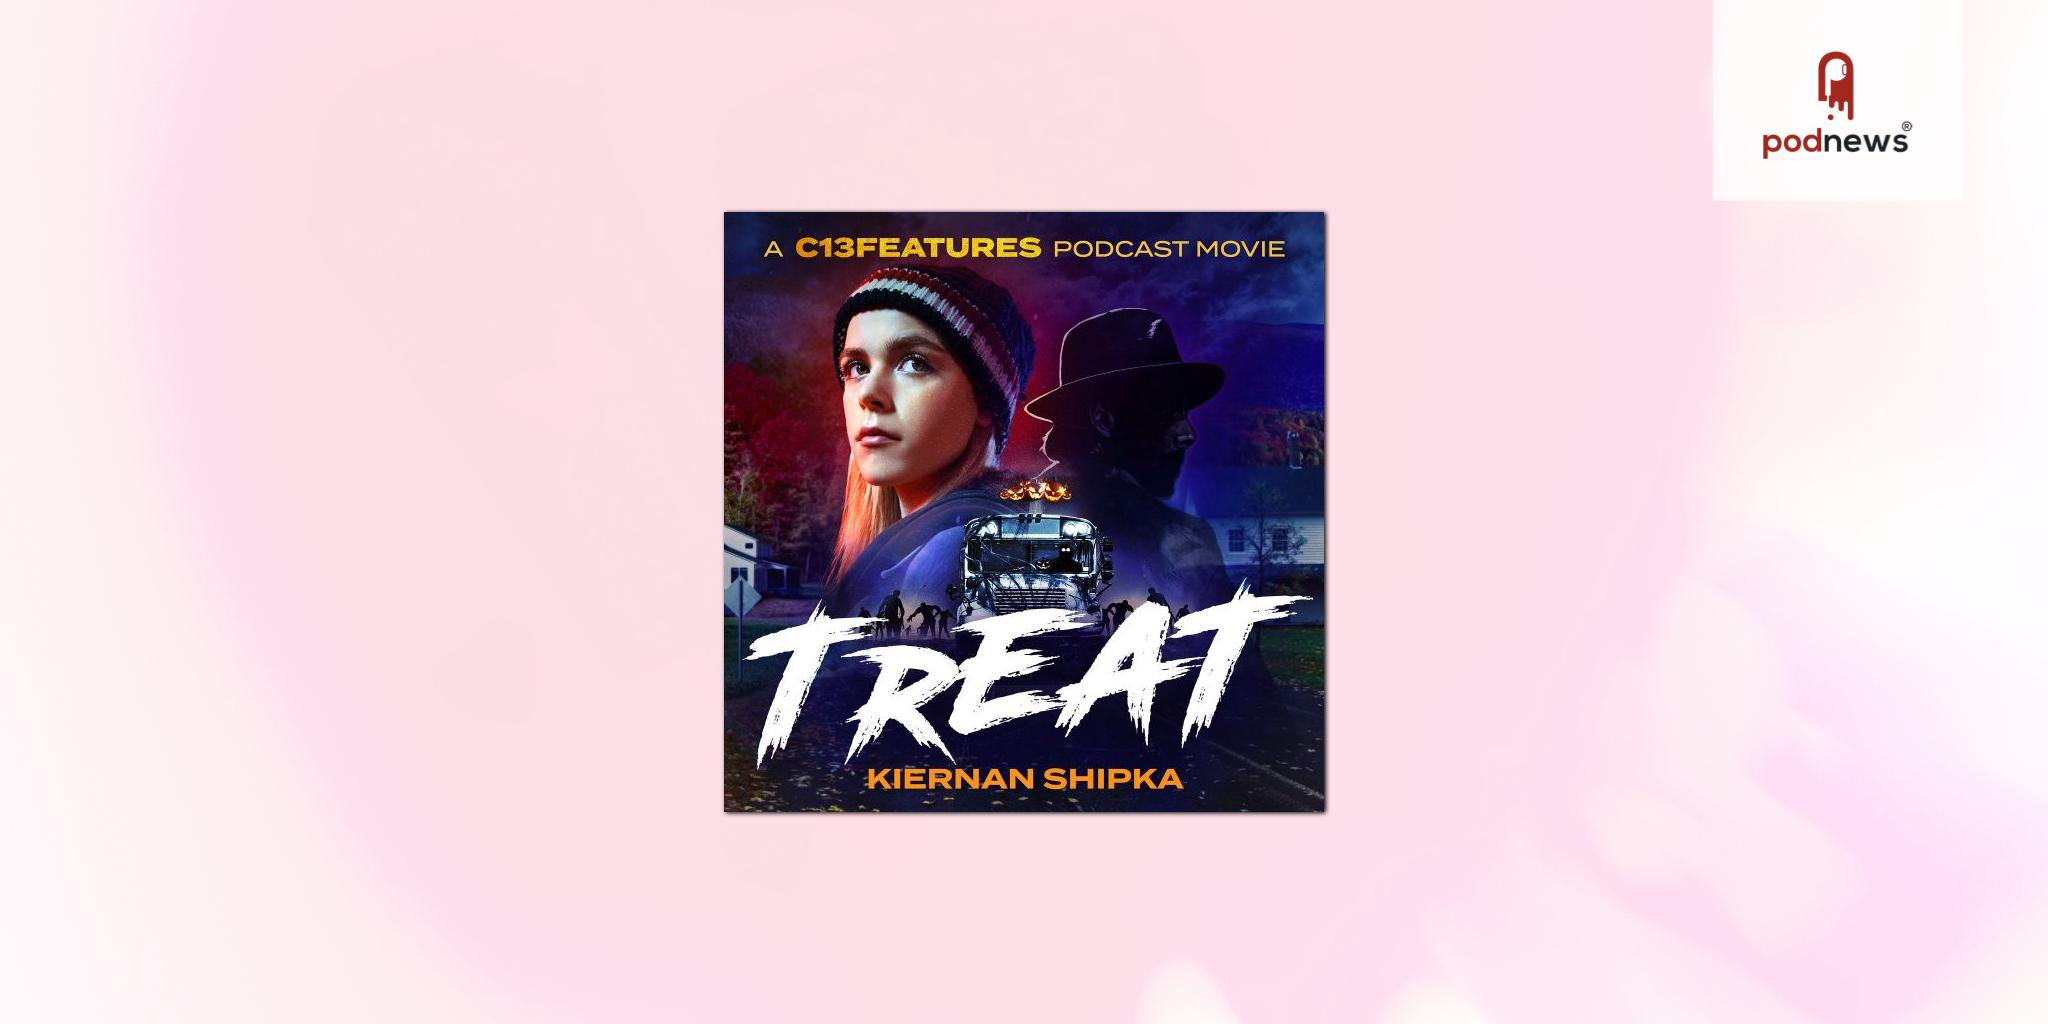 C13Features Unveils Trailer and Cover Art for its First Podcast Movie ‘Treat’